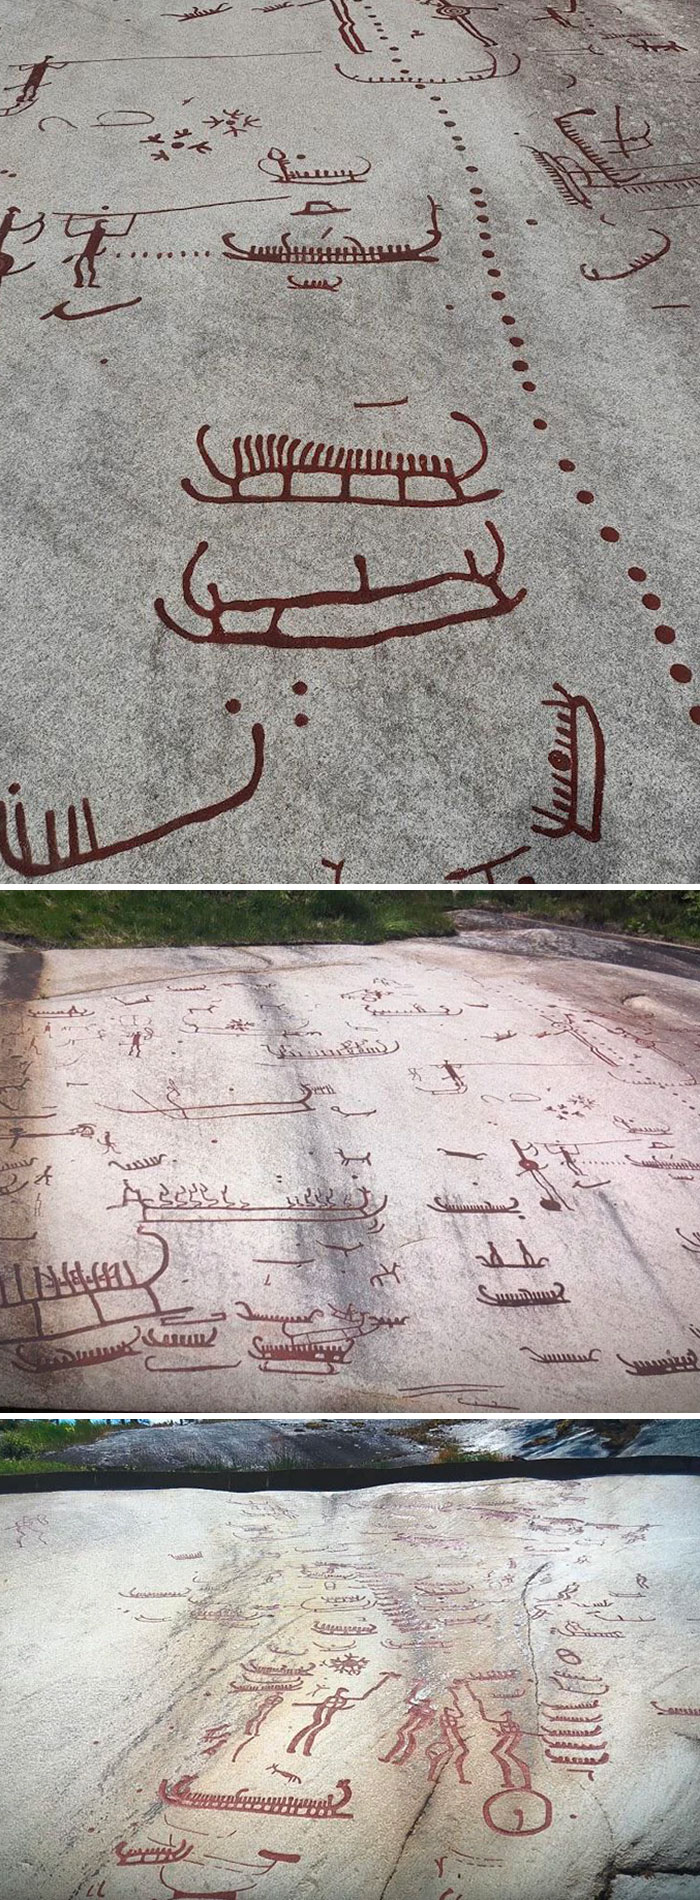 3,500-Year-Old Petroglyphs Found In Tanum, Sweden. Some Of The Carvings Are Boats, Animals, People And Mythological Creatures